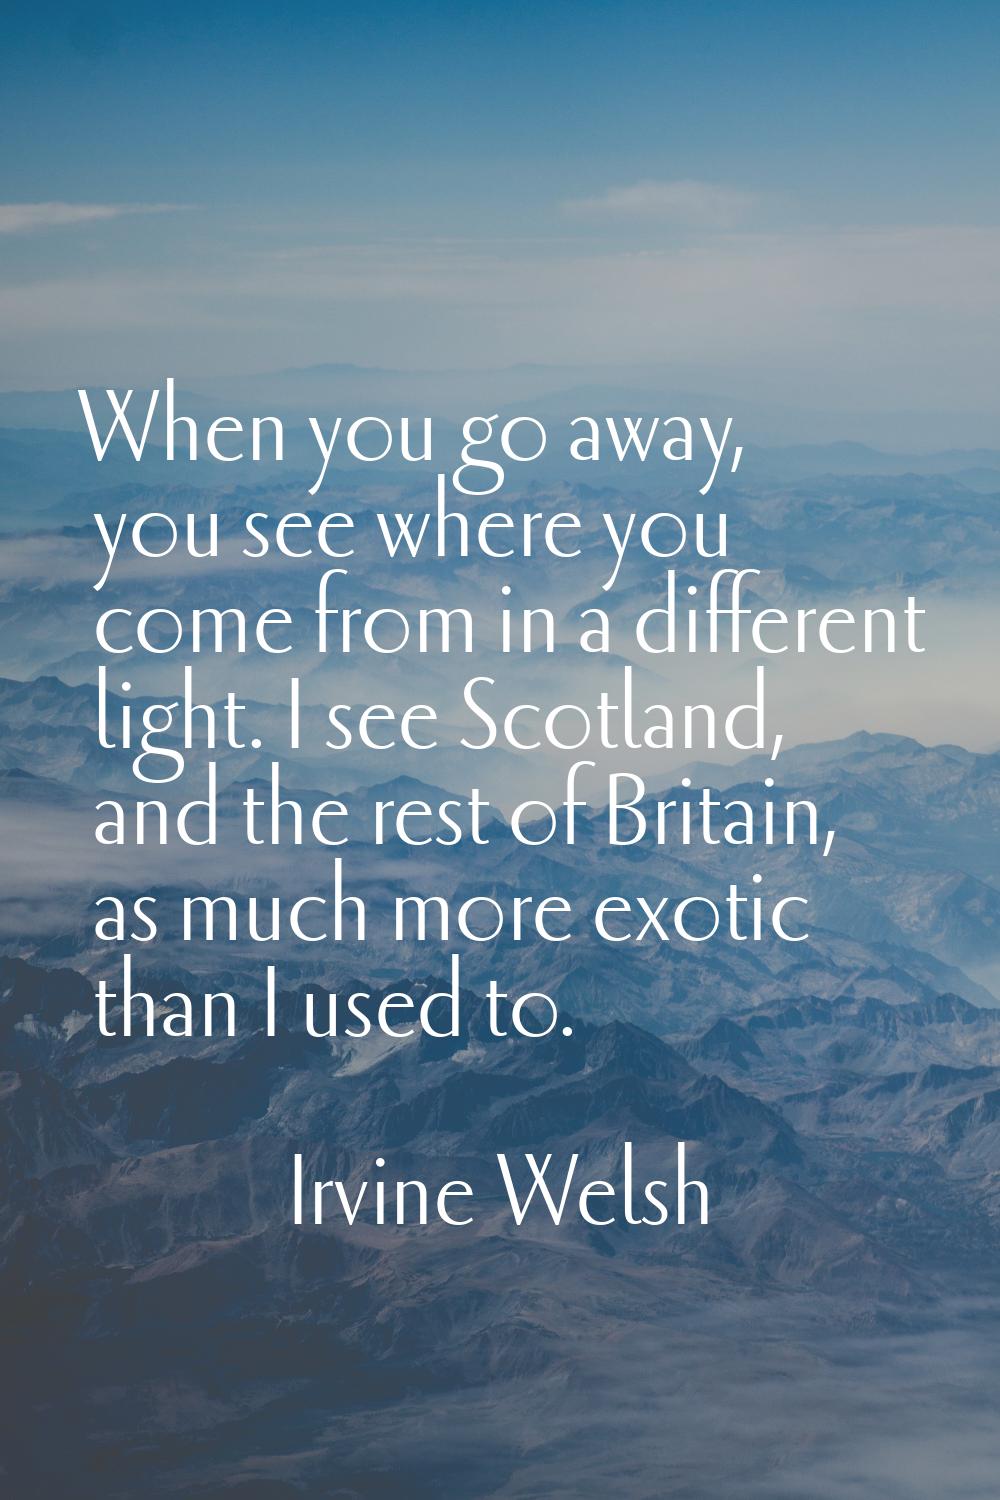 When you go away, you see where you come from in a different light. I see Scotland, and the rest of